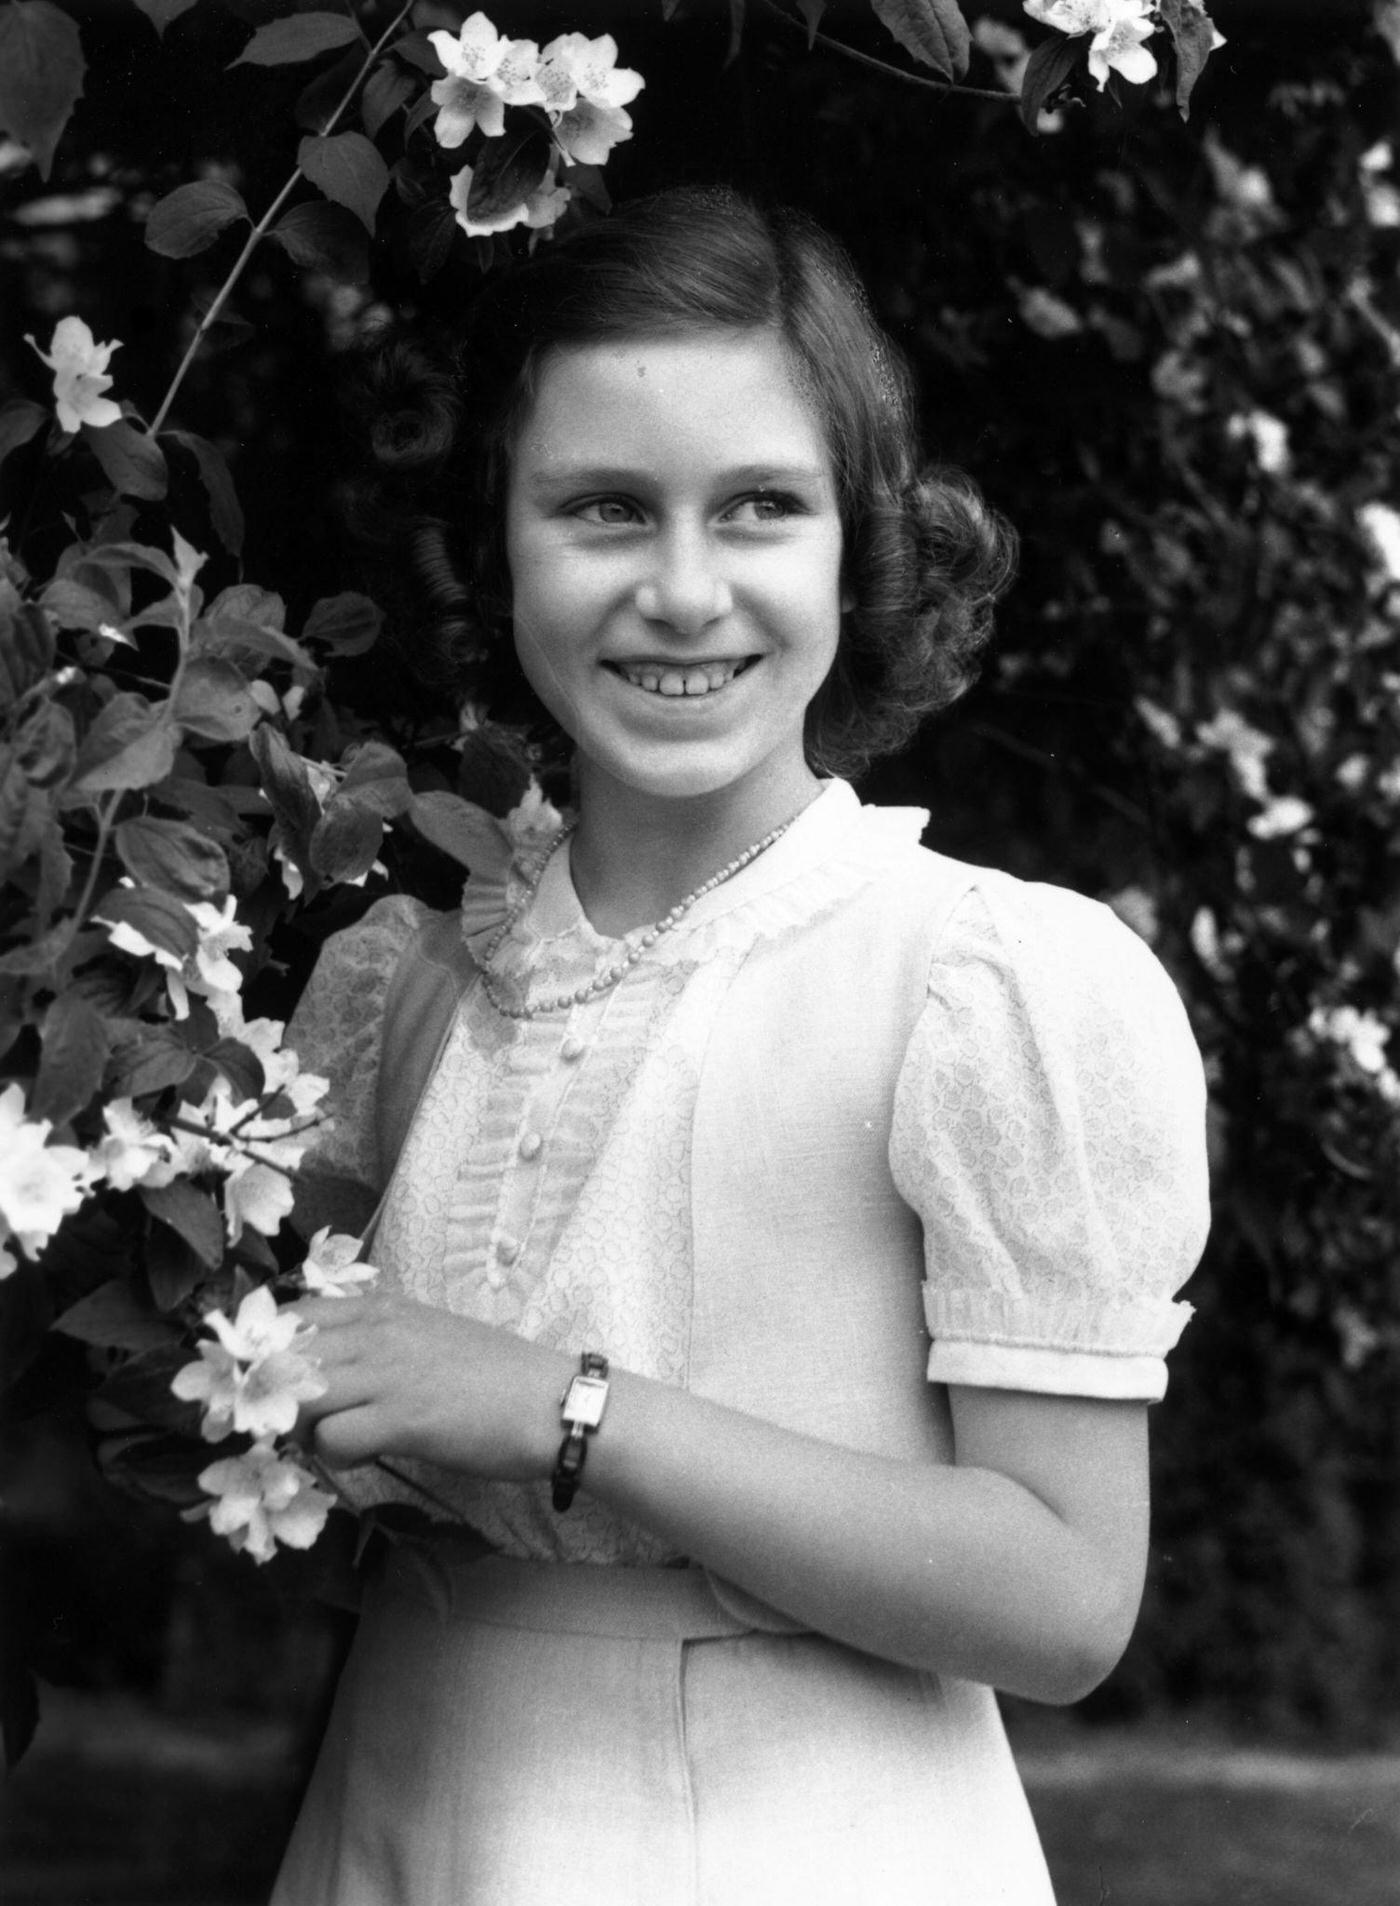 Princess Margaret Rose, younger daughter of King George VI and Queen Elizabeth and sister of Queen Elizabeth II, in the garden at Windsor Castle, 1941